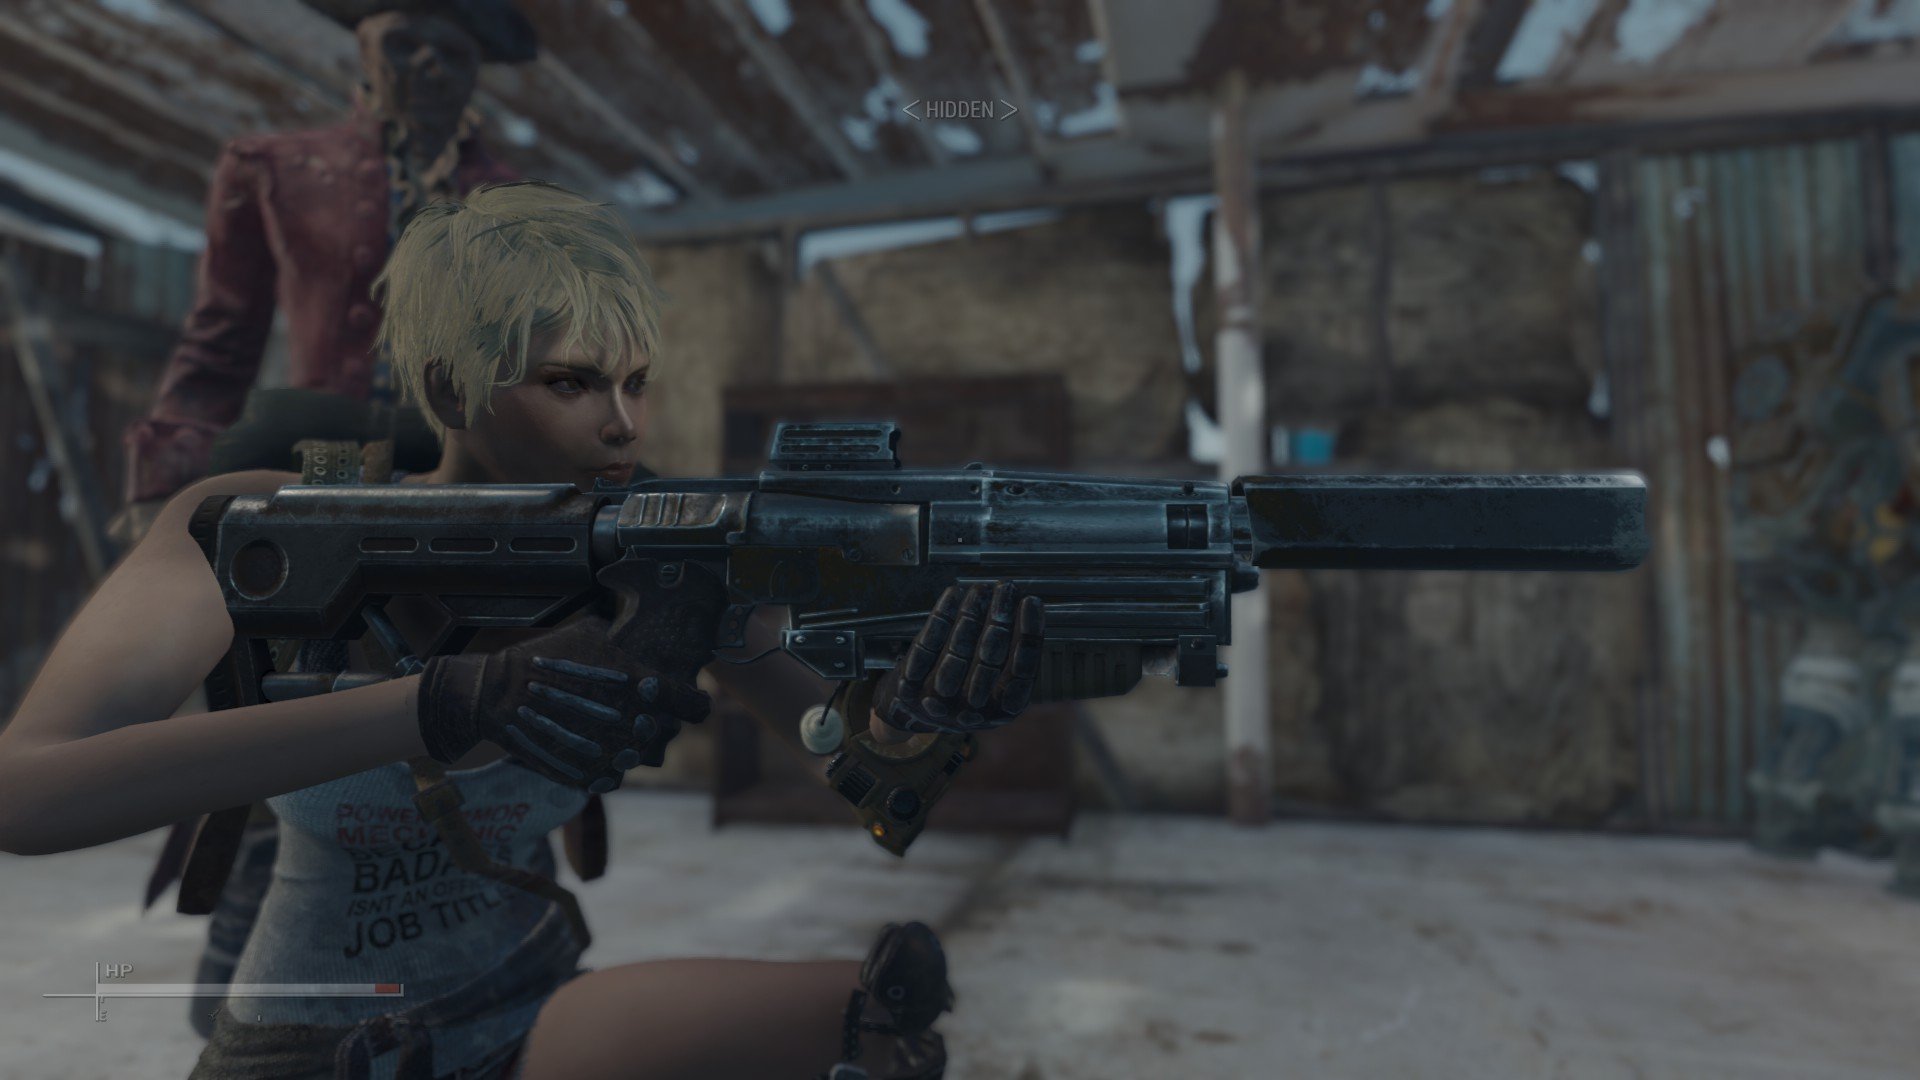 Lowered weapons для fallout 4 фото 114